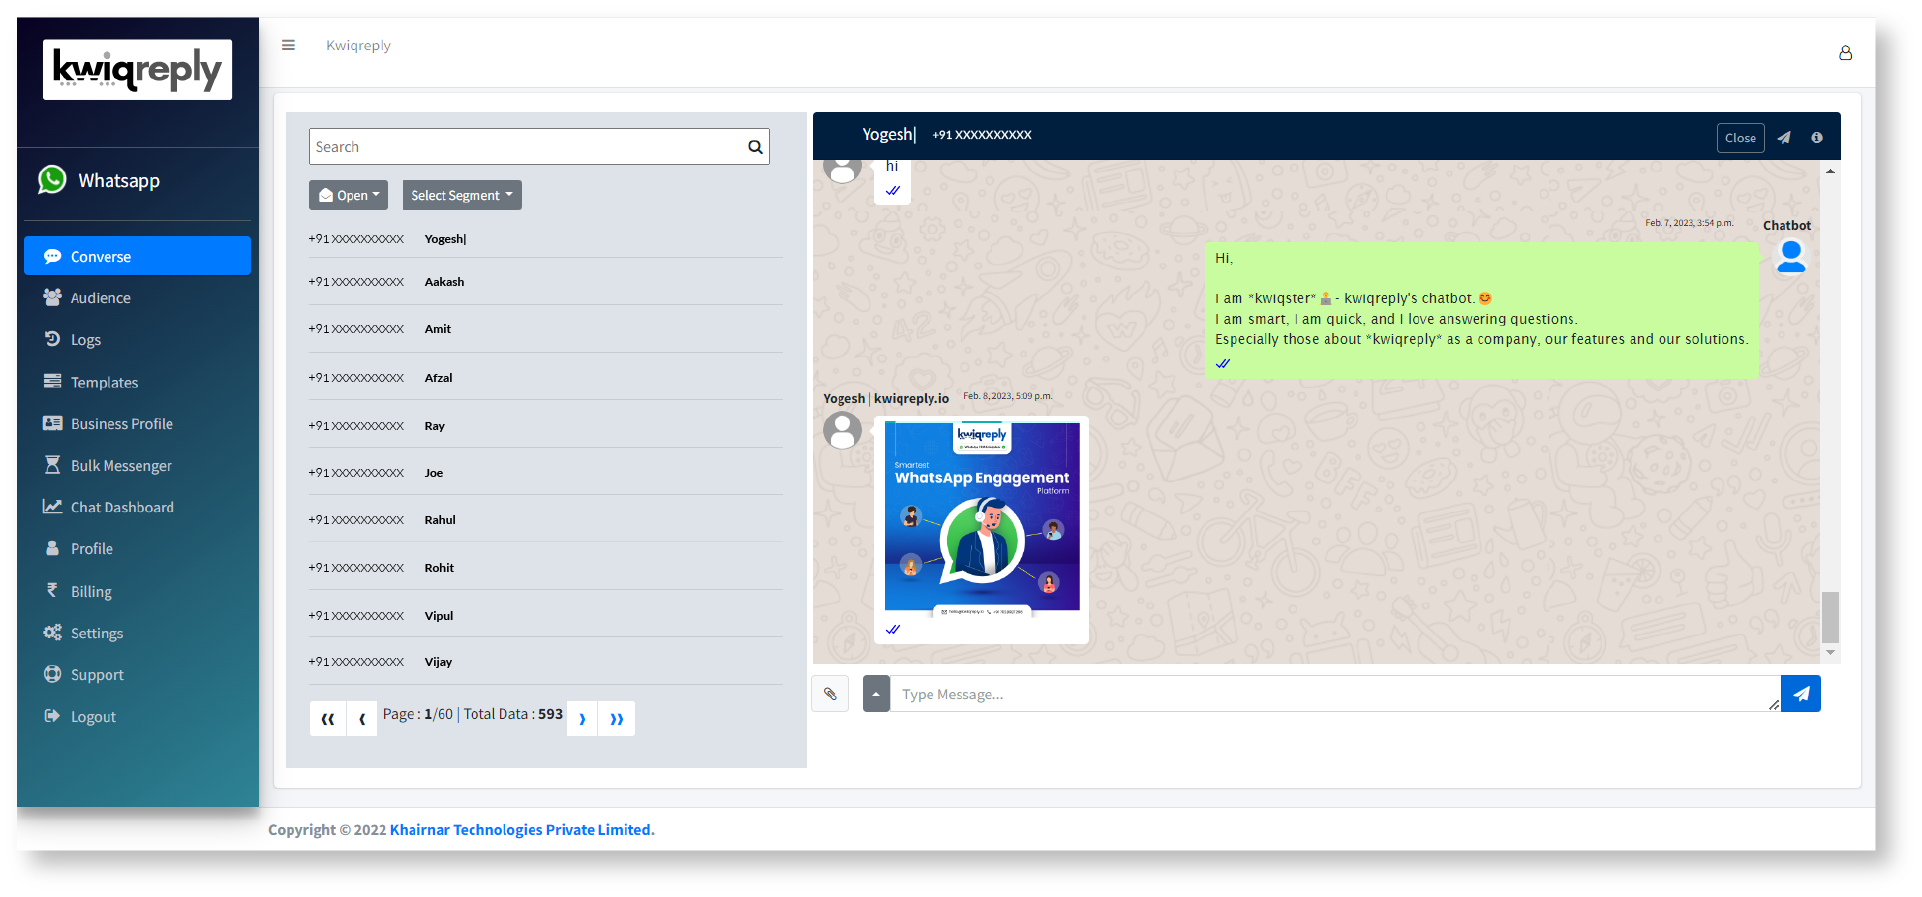 Chats Section of the Platform of kwiqreply, where users can converse and track individual conversation with customers